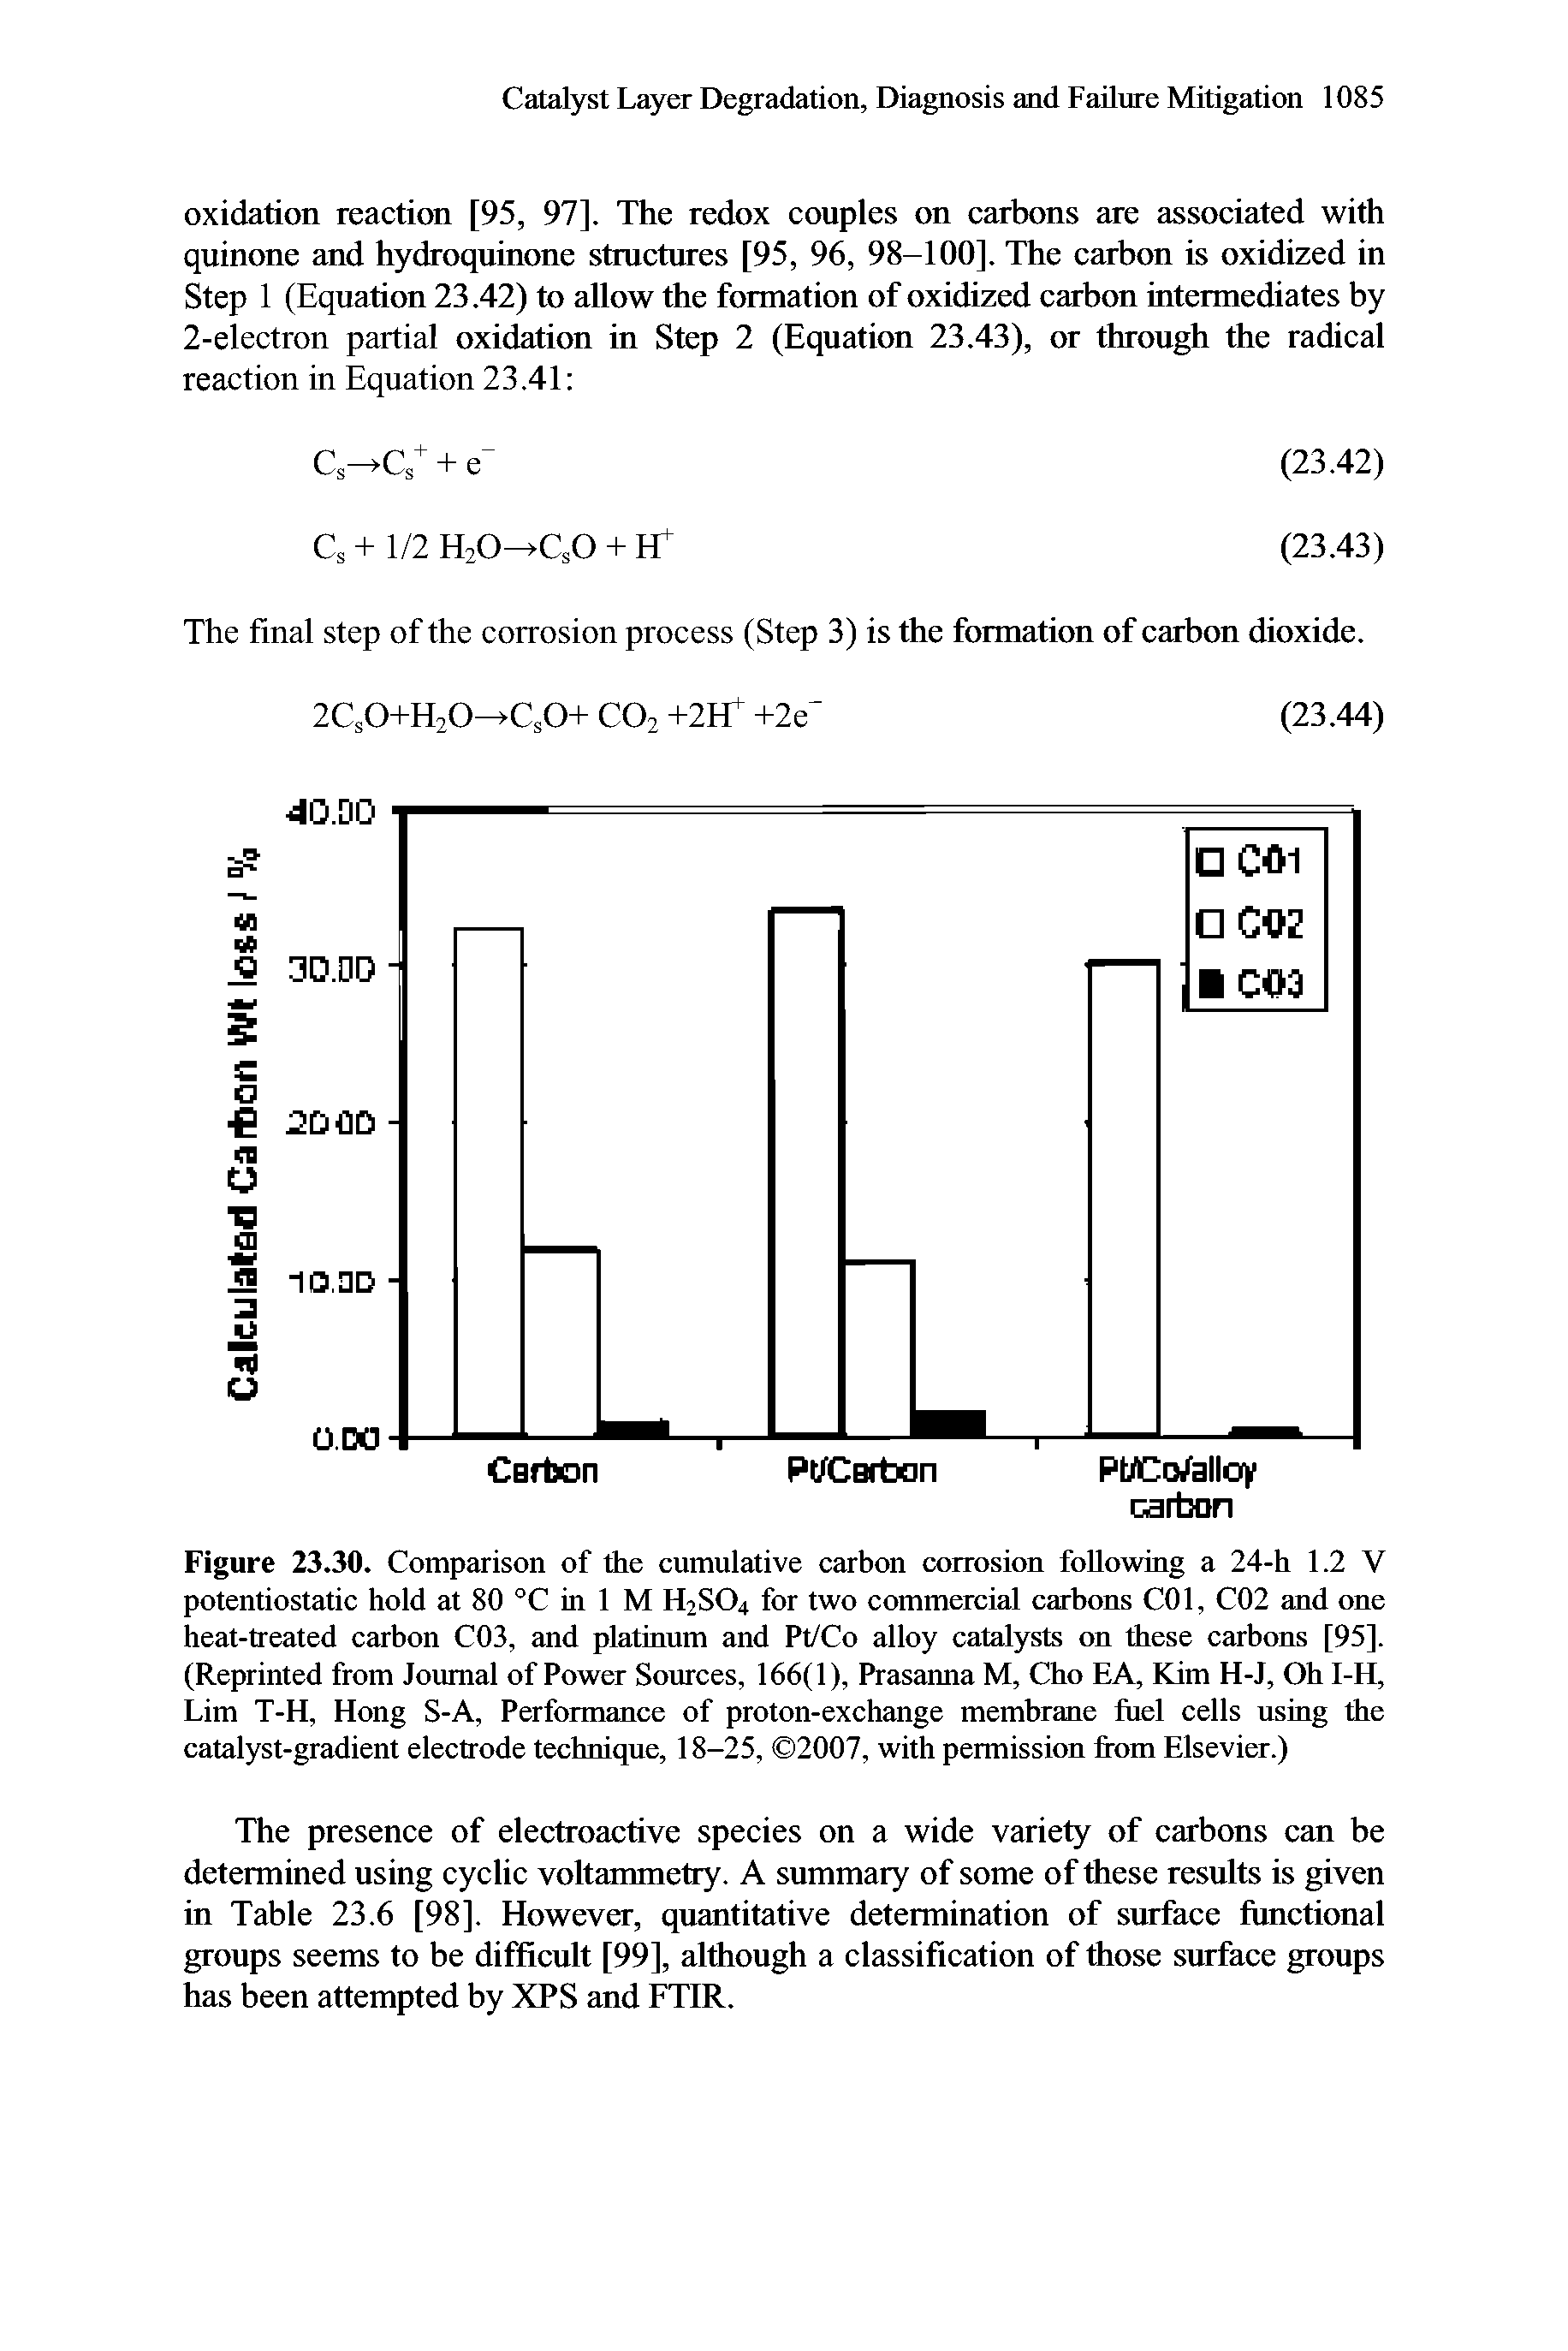 Figure 23.30. Comparison of the cumulative carbon corrosion following a 24-h 1.2 V potentiostatic hold at 80 °C in 1 M H2SO4 for two commercial carbons COl, C02 and one heat-treated carbon C03, and platinum and Pt/Co alloy catalysts on these carbons [95]. (Reprinted from Journal of Power Sources, 166(1), Prasanna M, Cho EA, Kim H-J, Oh I-H, Lim T-H, Hong S-A, Performance of proton-exchange membrane fuel cells using the catalyst-gradient electrode technique, 18-25, 2007, with permission from Elsevier.)...